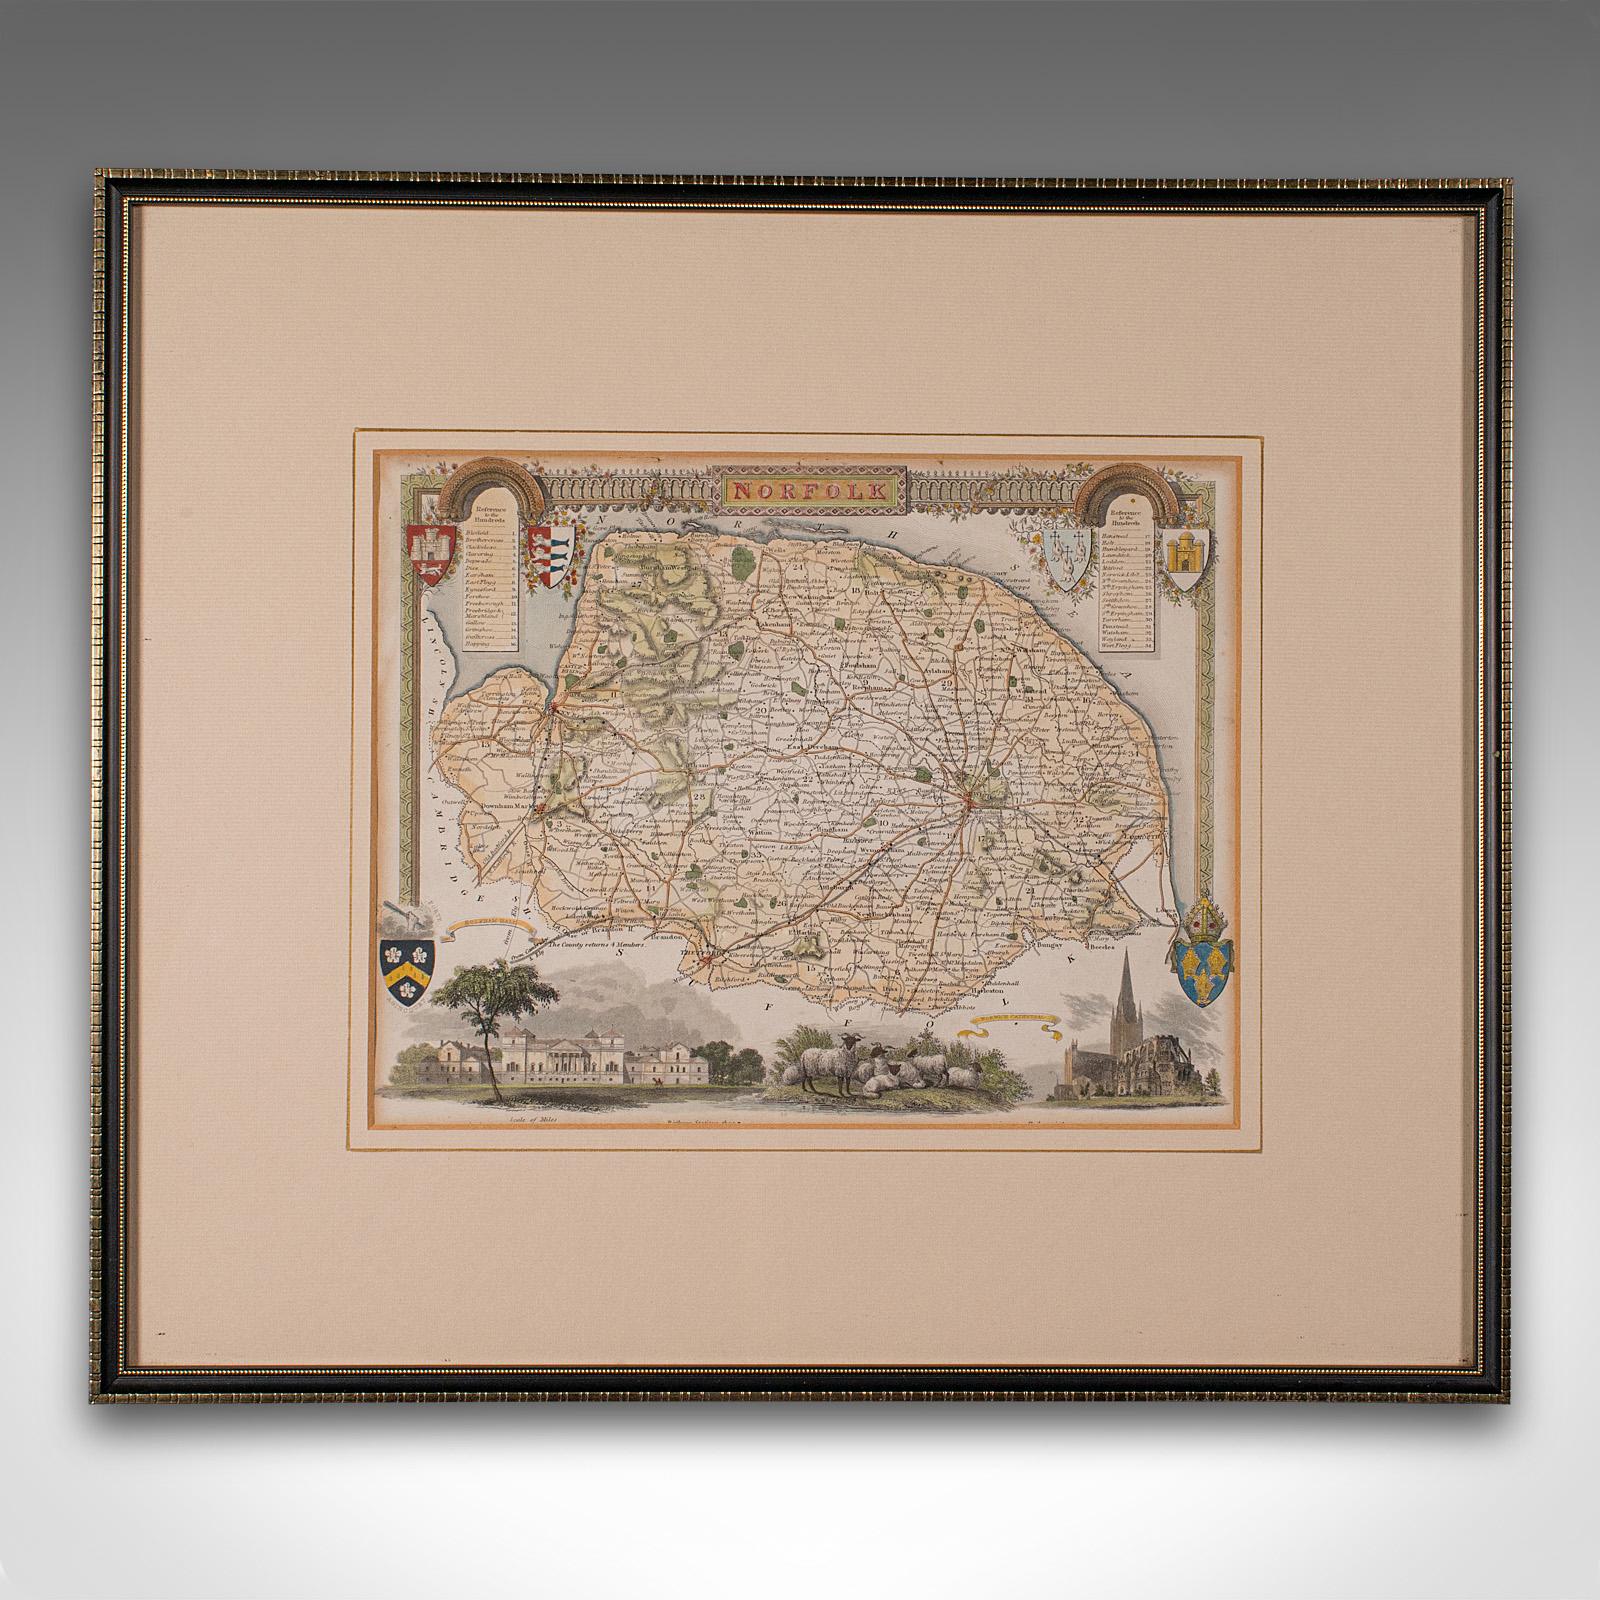 This is an antique lithography map of Norfolk. An English, framed atlas engraving of cartographic interest, dating to the mid 19th century and later.

Superb lithography of Norfolk and its county detail, perfect for display
Displaying a desirable